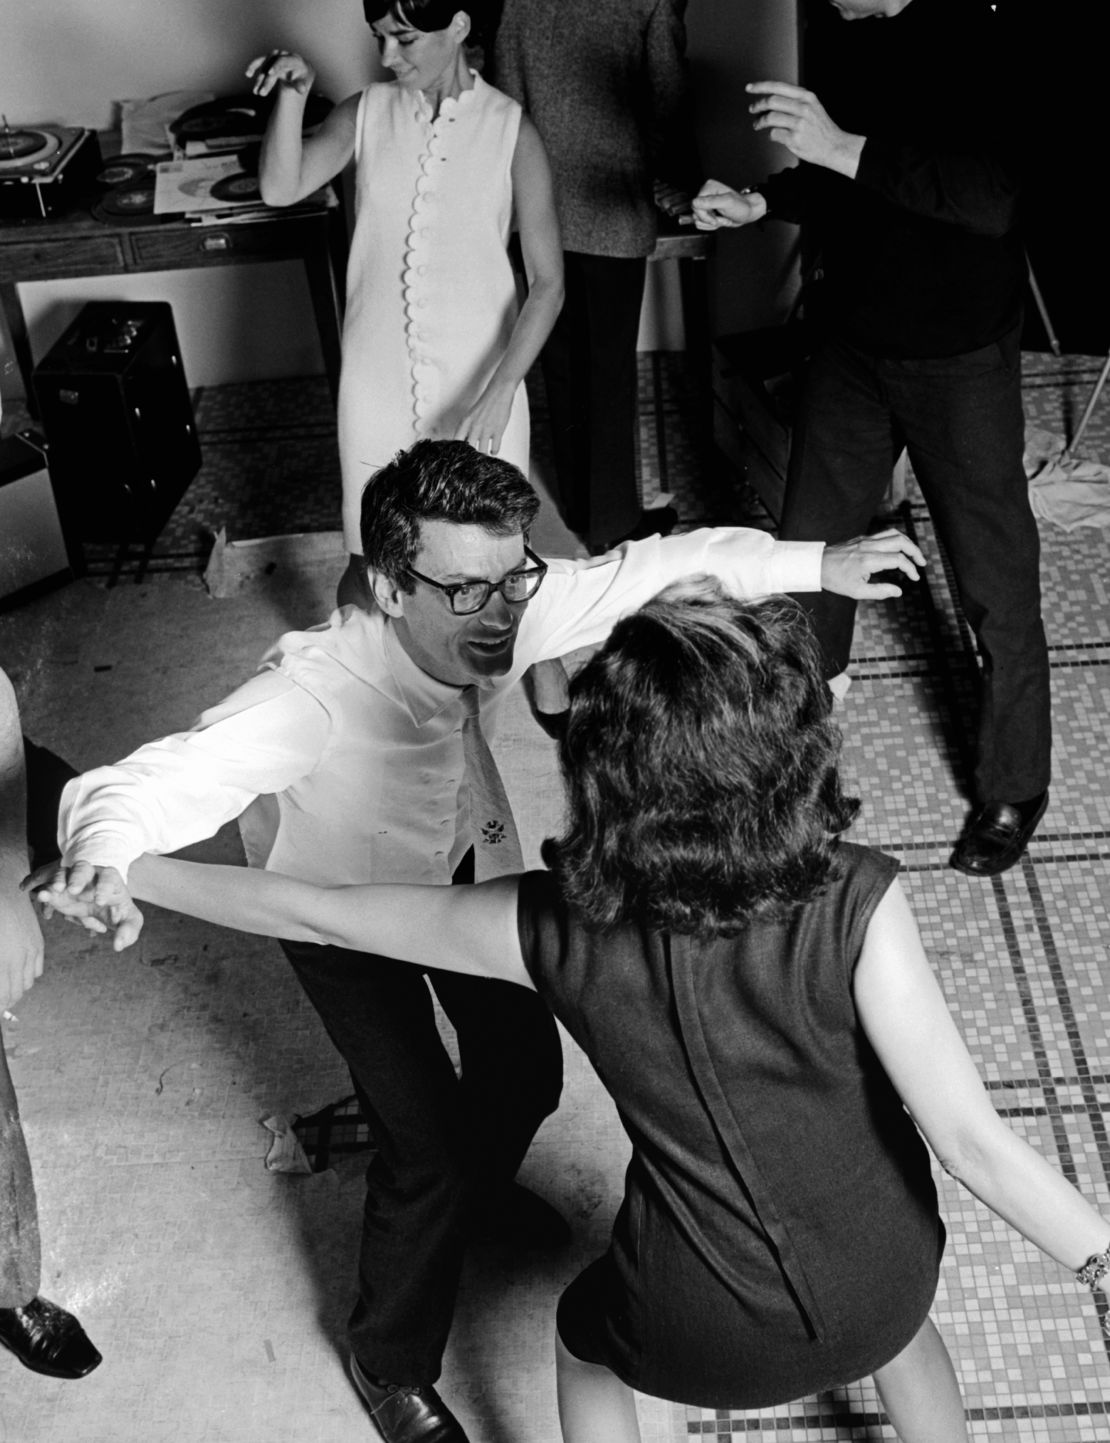 Avedon and China Machado dancing at an after party in Paris in 1965.